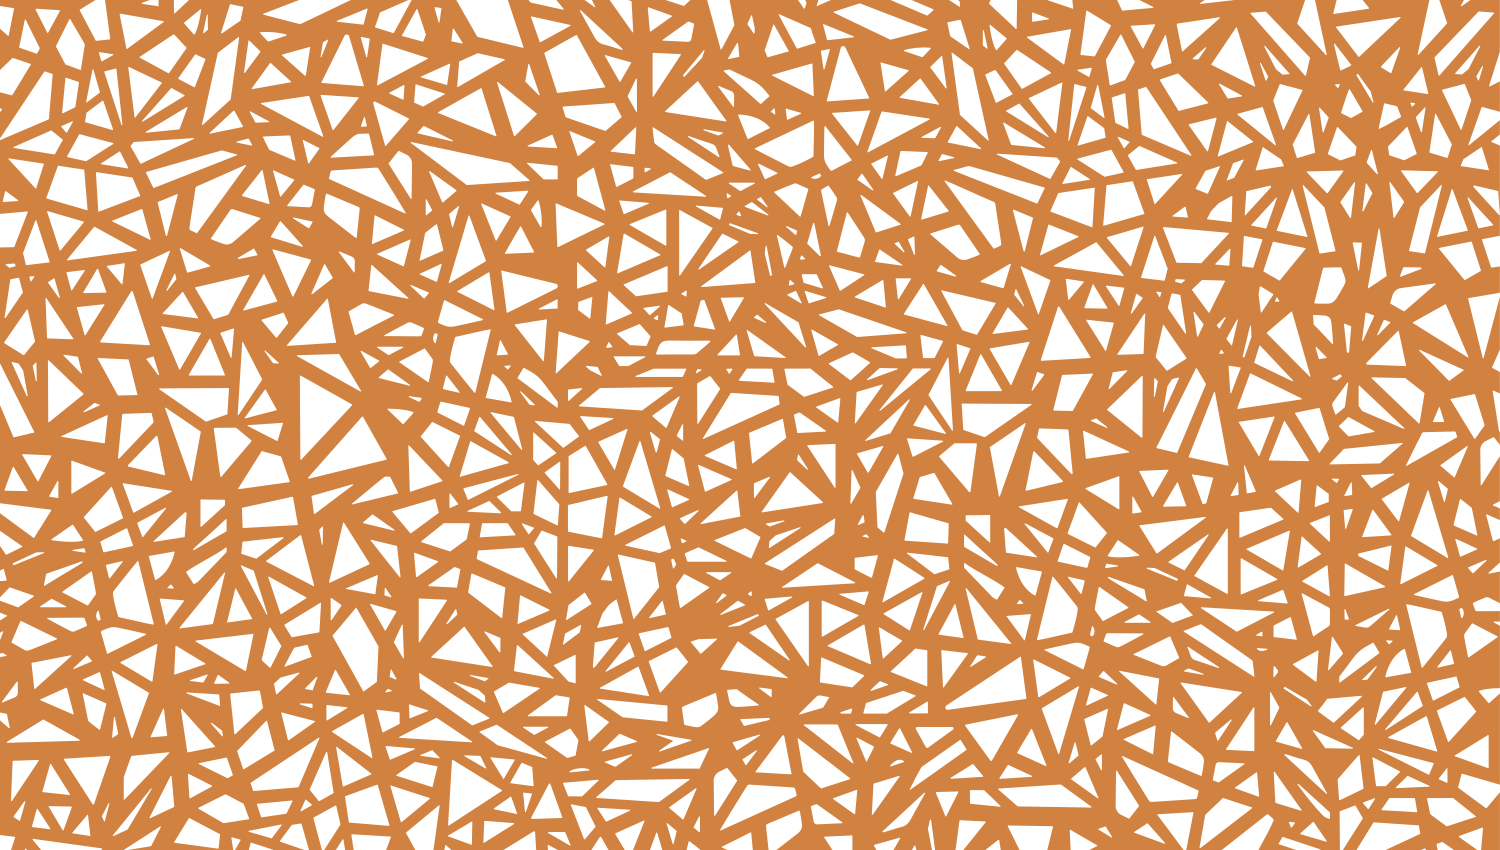 Parasoleil™ Fractal© pattern displayed with a ochre color overlay